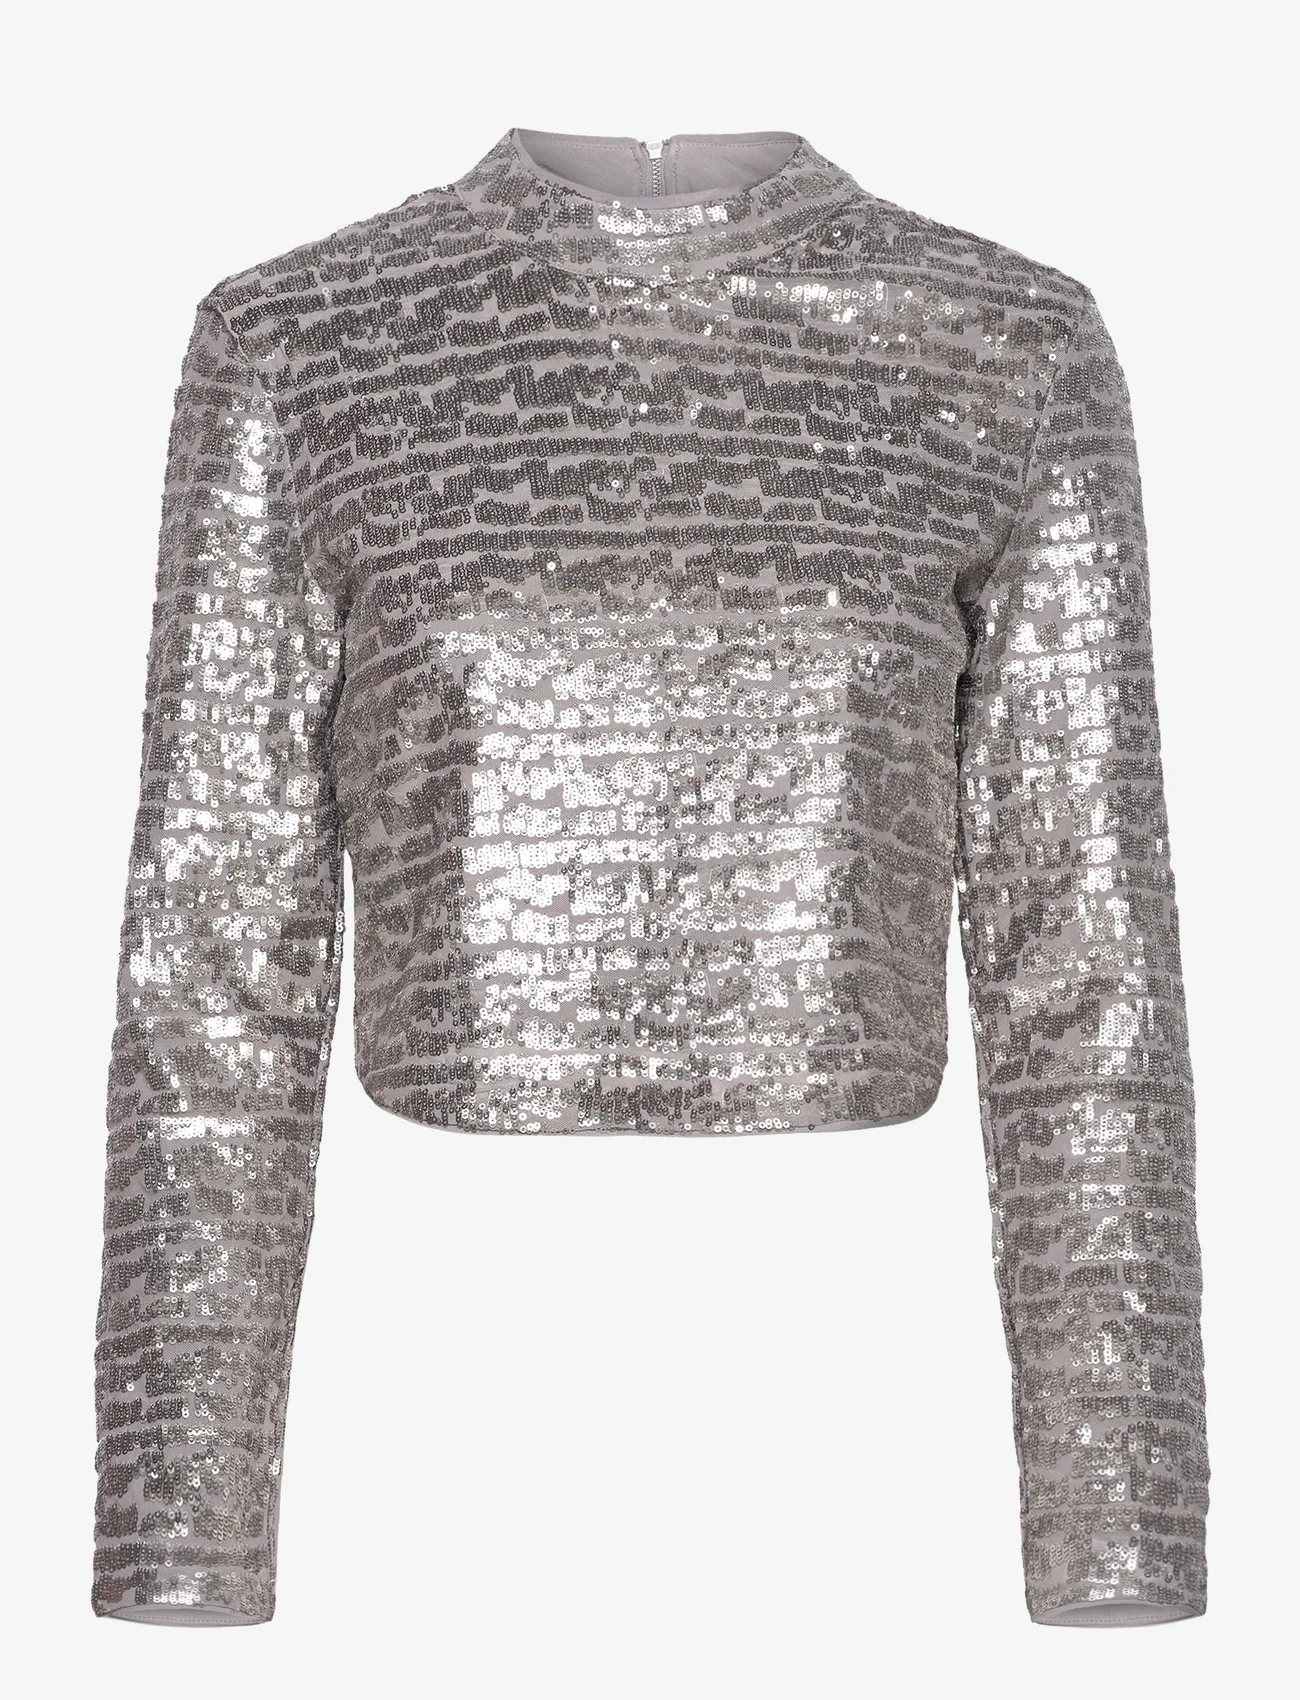 French Connection - ADALYNN SEQUIN TOP - long-sleeved tops - gun metal - 0